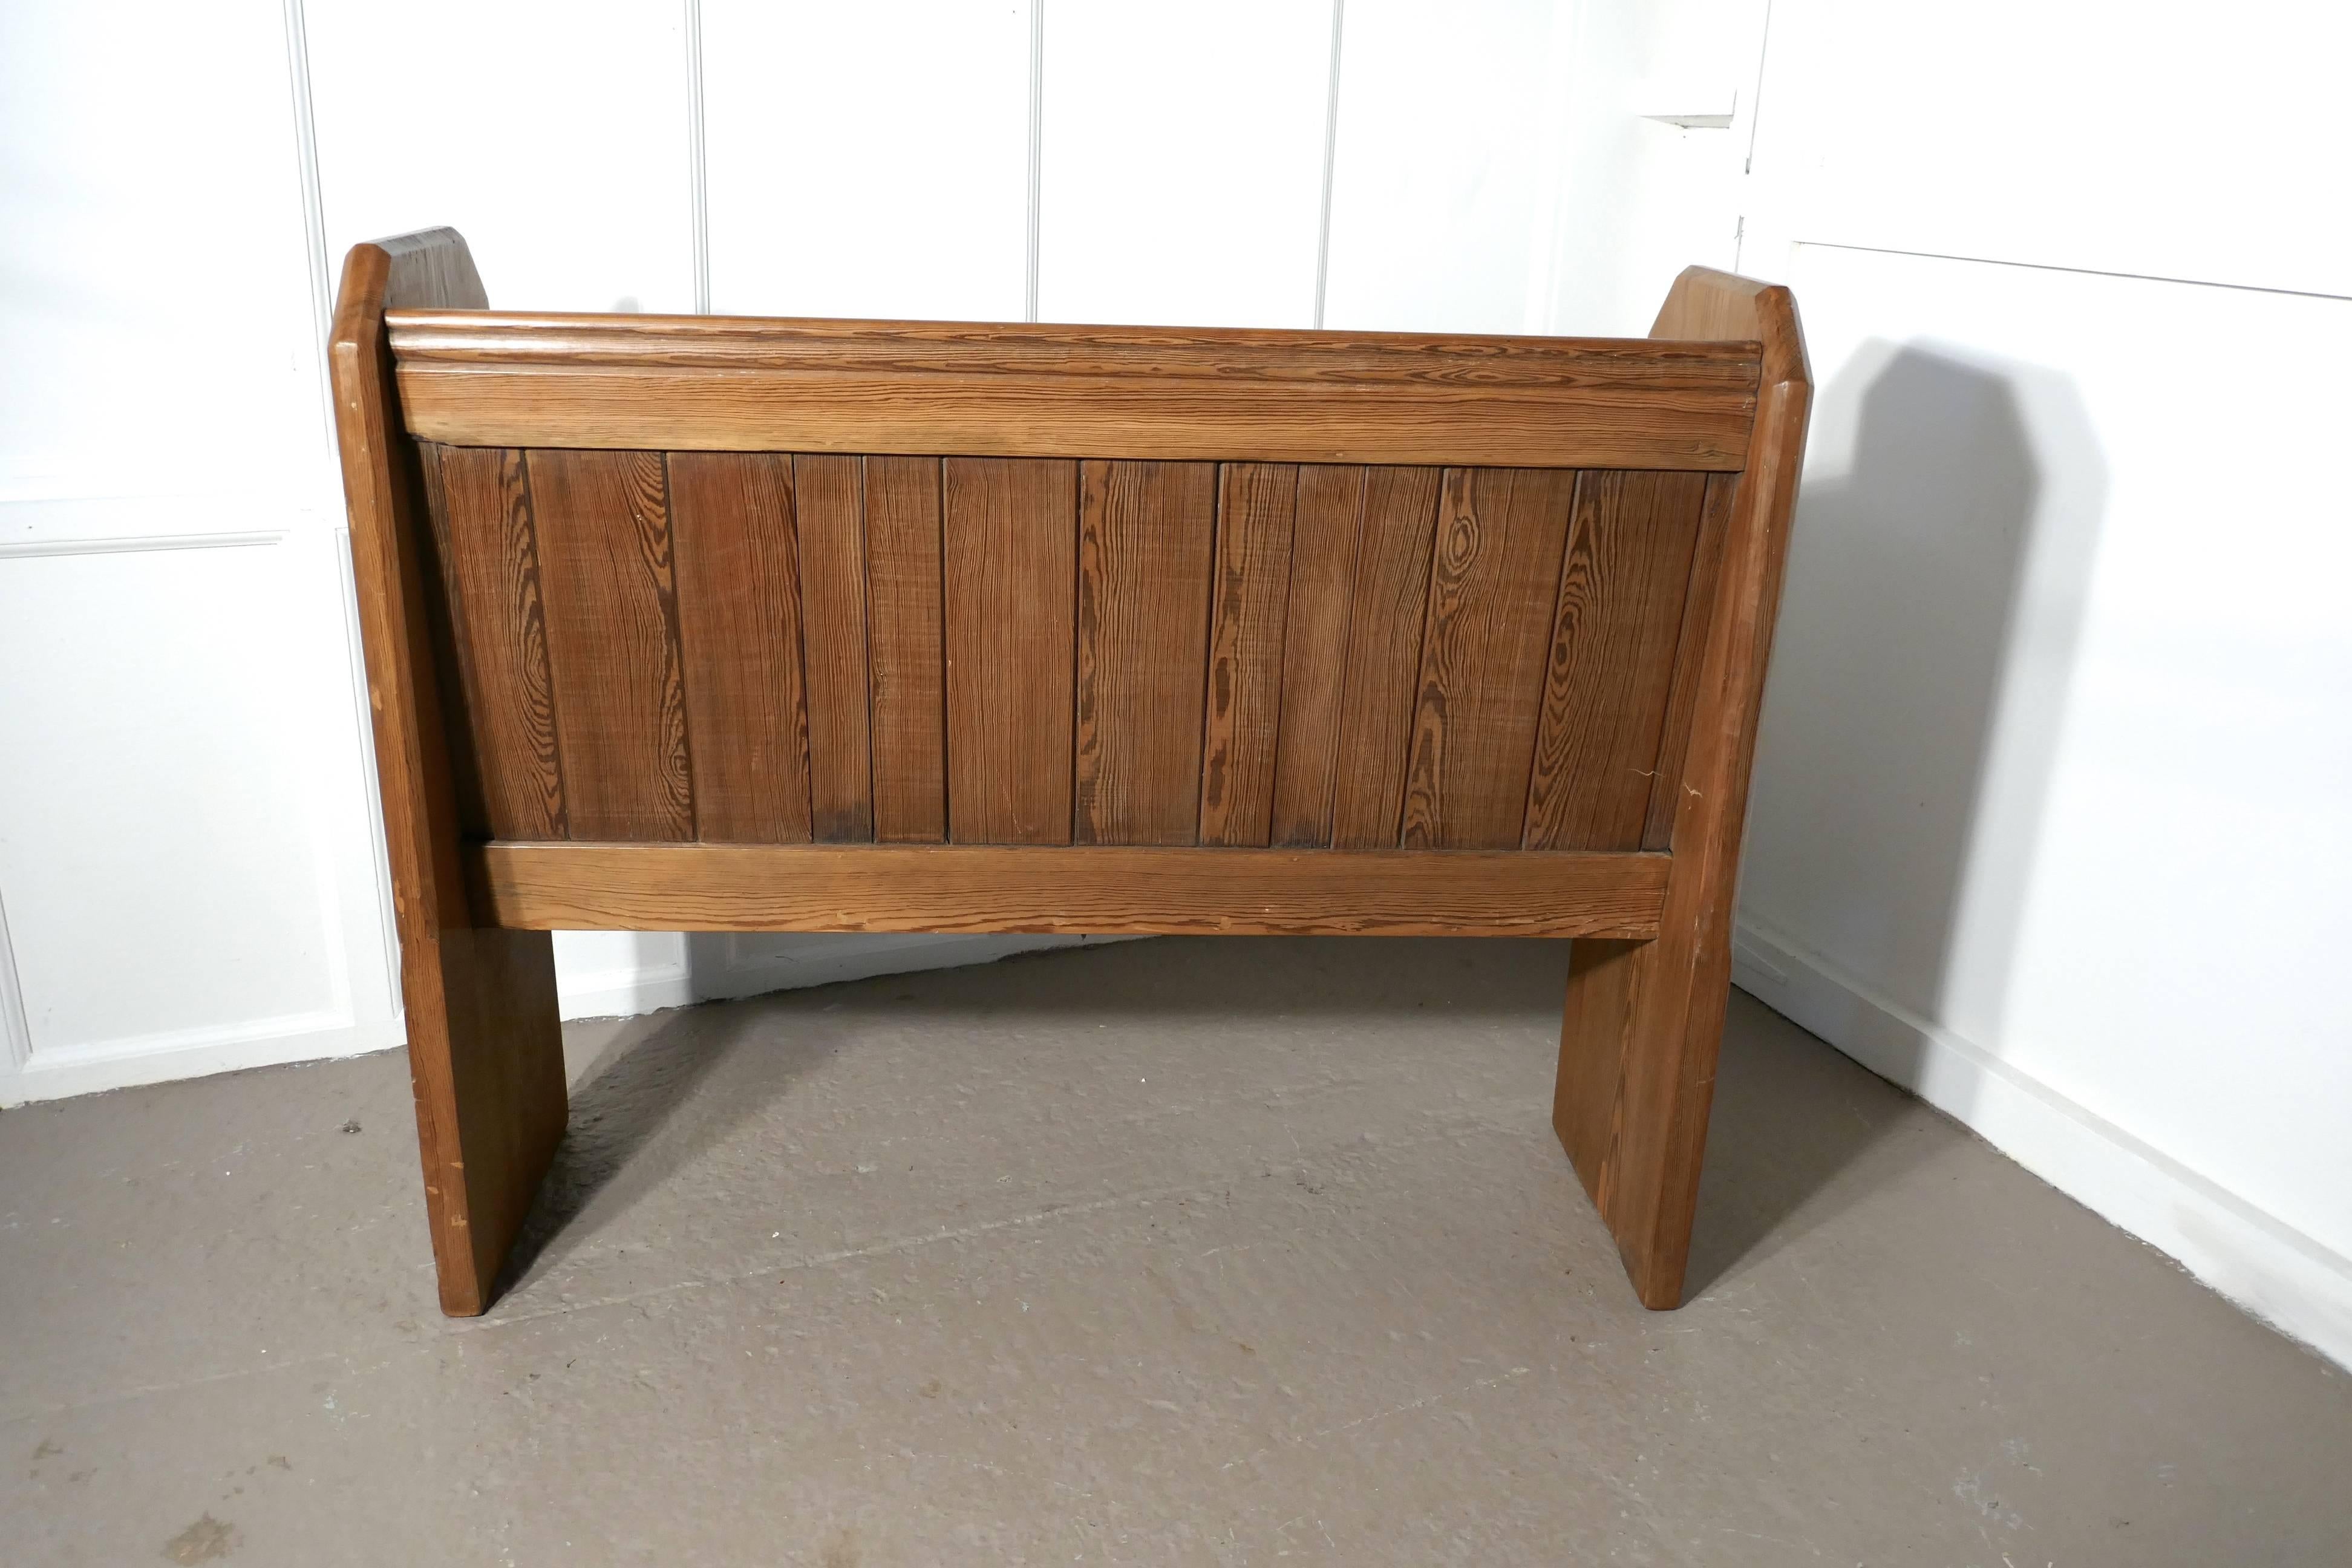 A Victorian pine kitchen bench or church pew
 
The bench is made heavy quality pitch pine, the sides are made from wood 2” thick and the seat is 1.5” thick and the wood is in its original dark pine finish 
Measure: The bench is in good sound